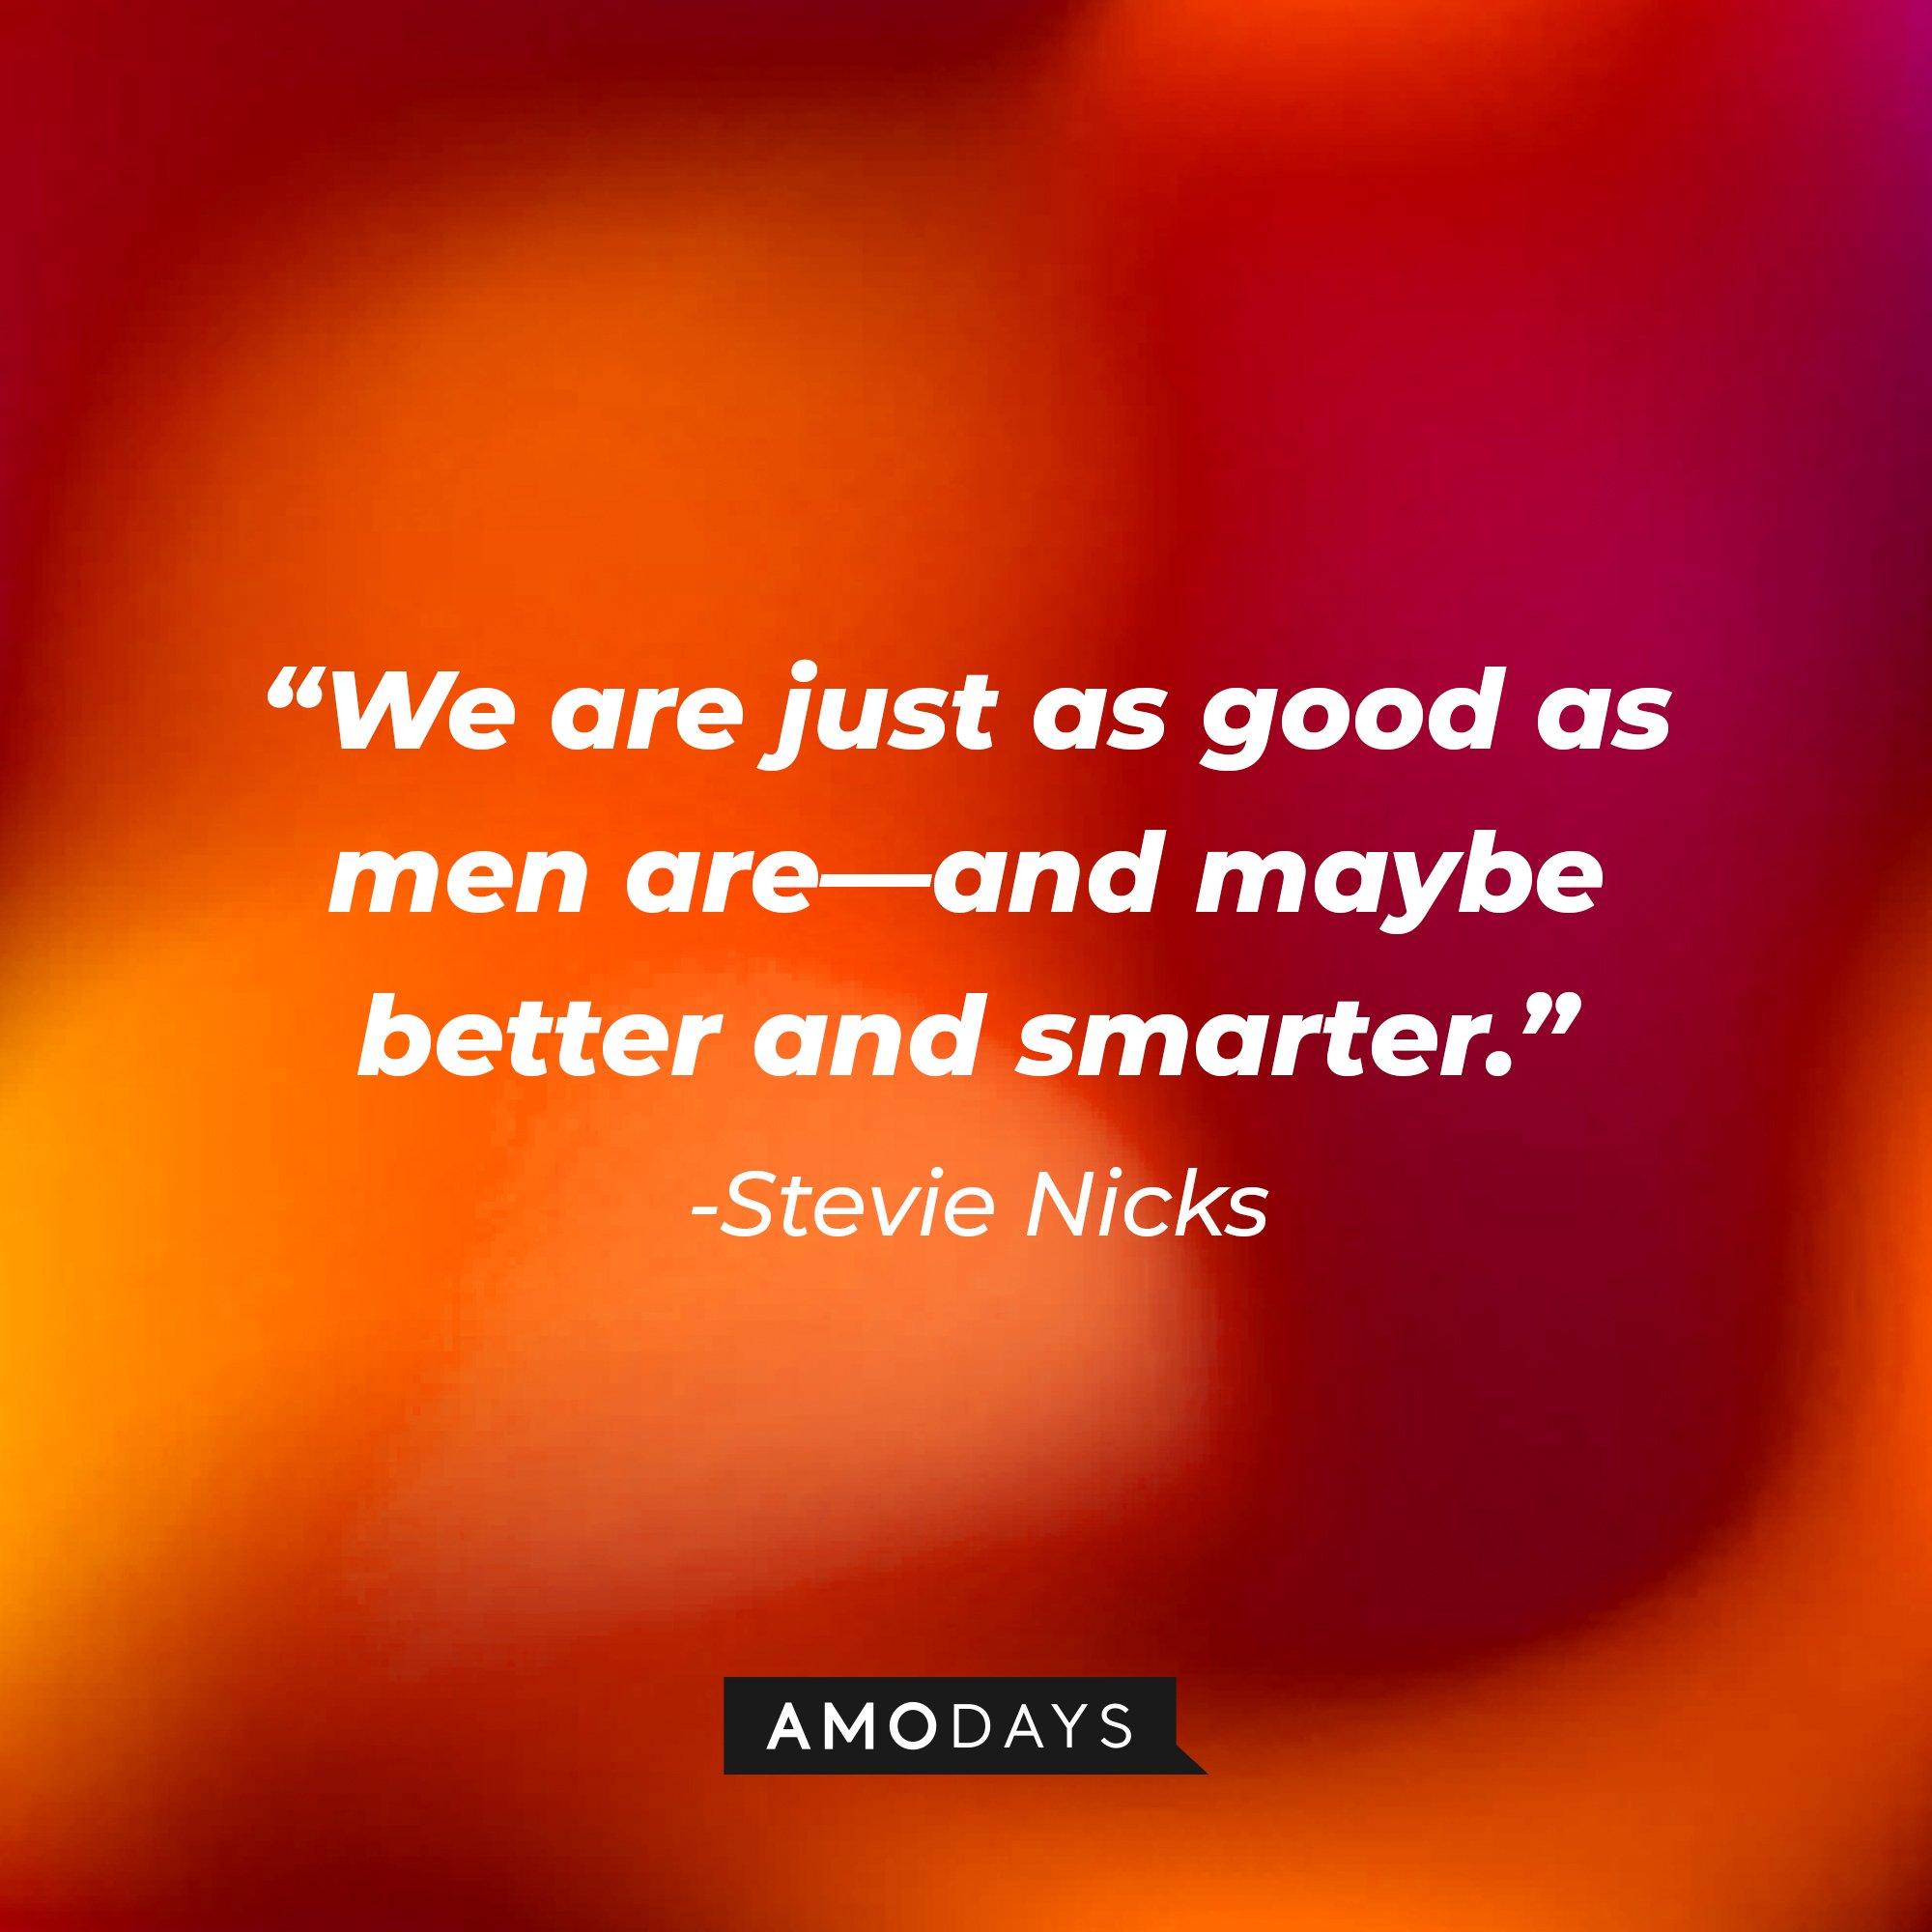 Stevie Nicks's quote: "We are just as good as men are—and maybe better and smarter." | Image: AmoDays